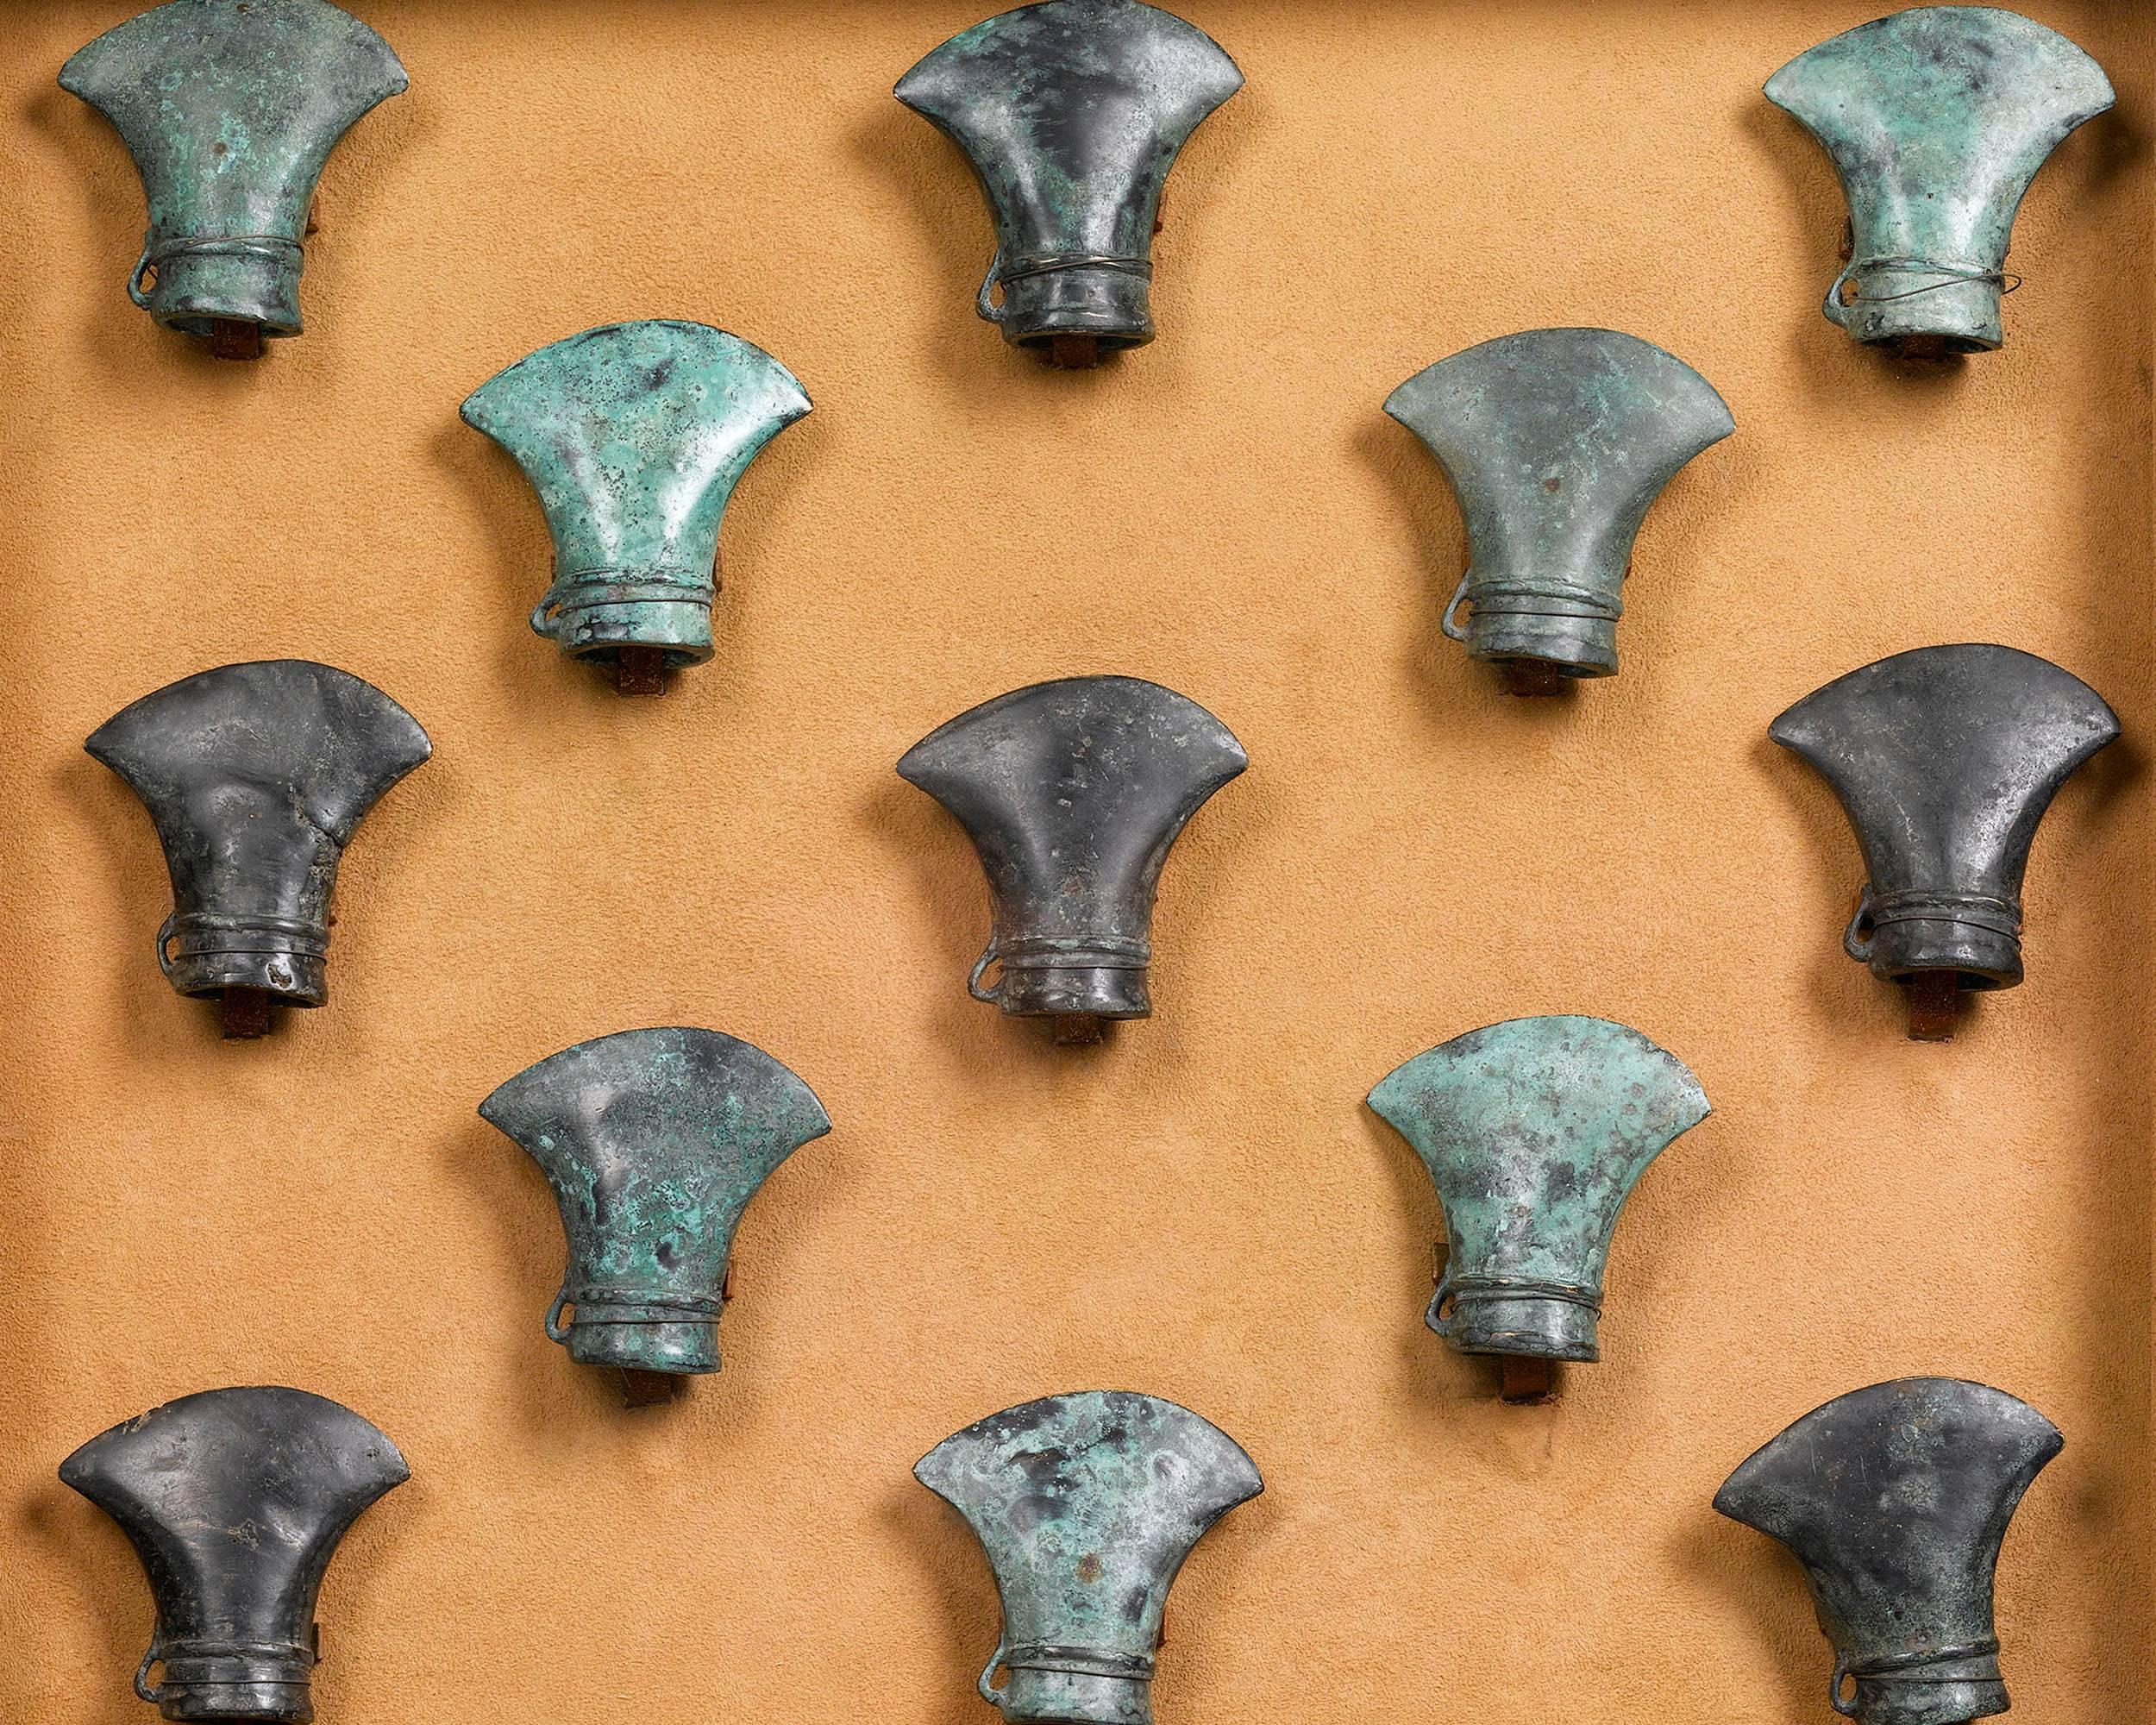 These rare, early Celtic bronze axe heads were forged in northern Gaul during the late Bronze and early Iron ages. Found in Longrave, Caen, France in 1929, these axes were crafted during a time in Europe when the use of copper and bronze tools